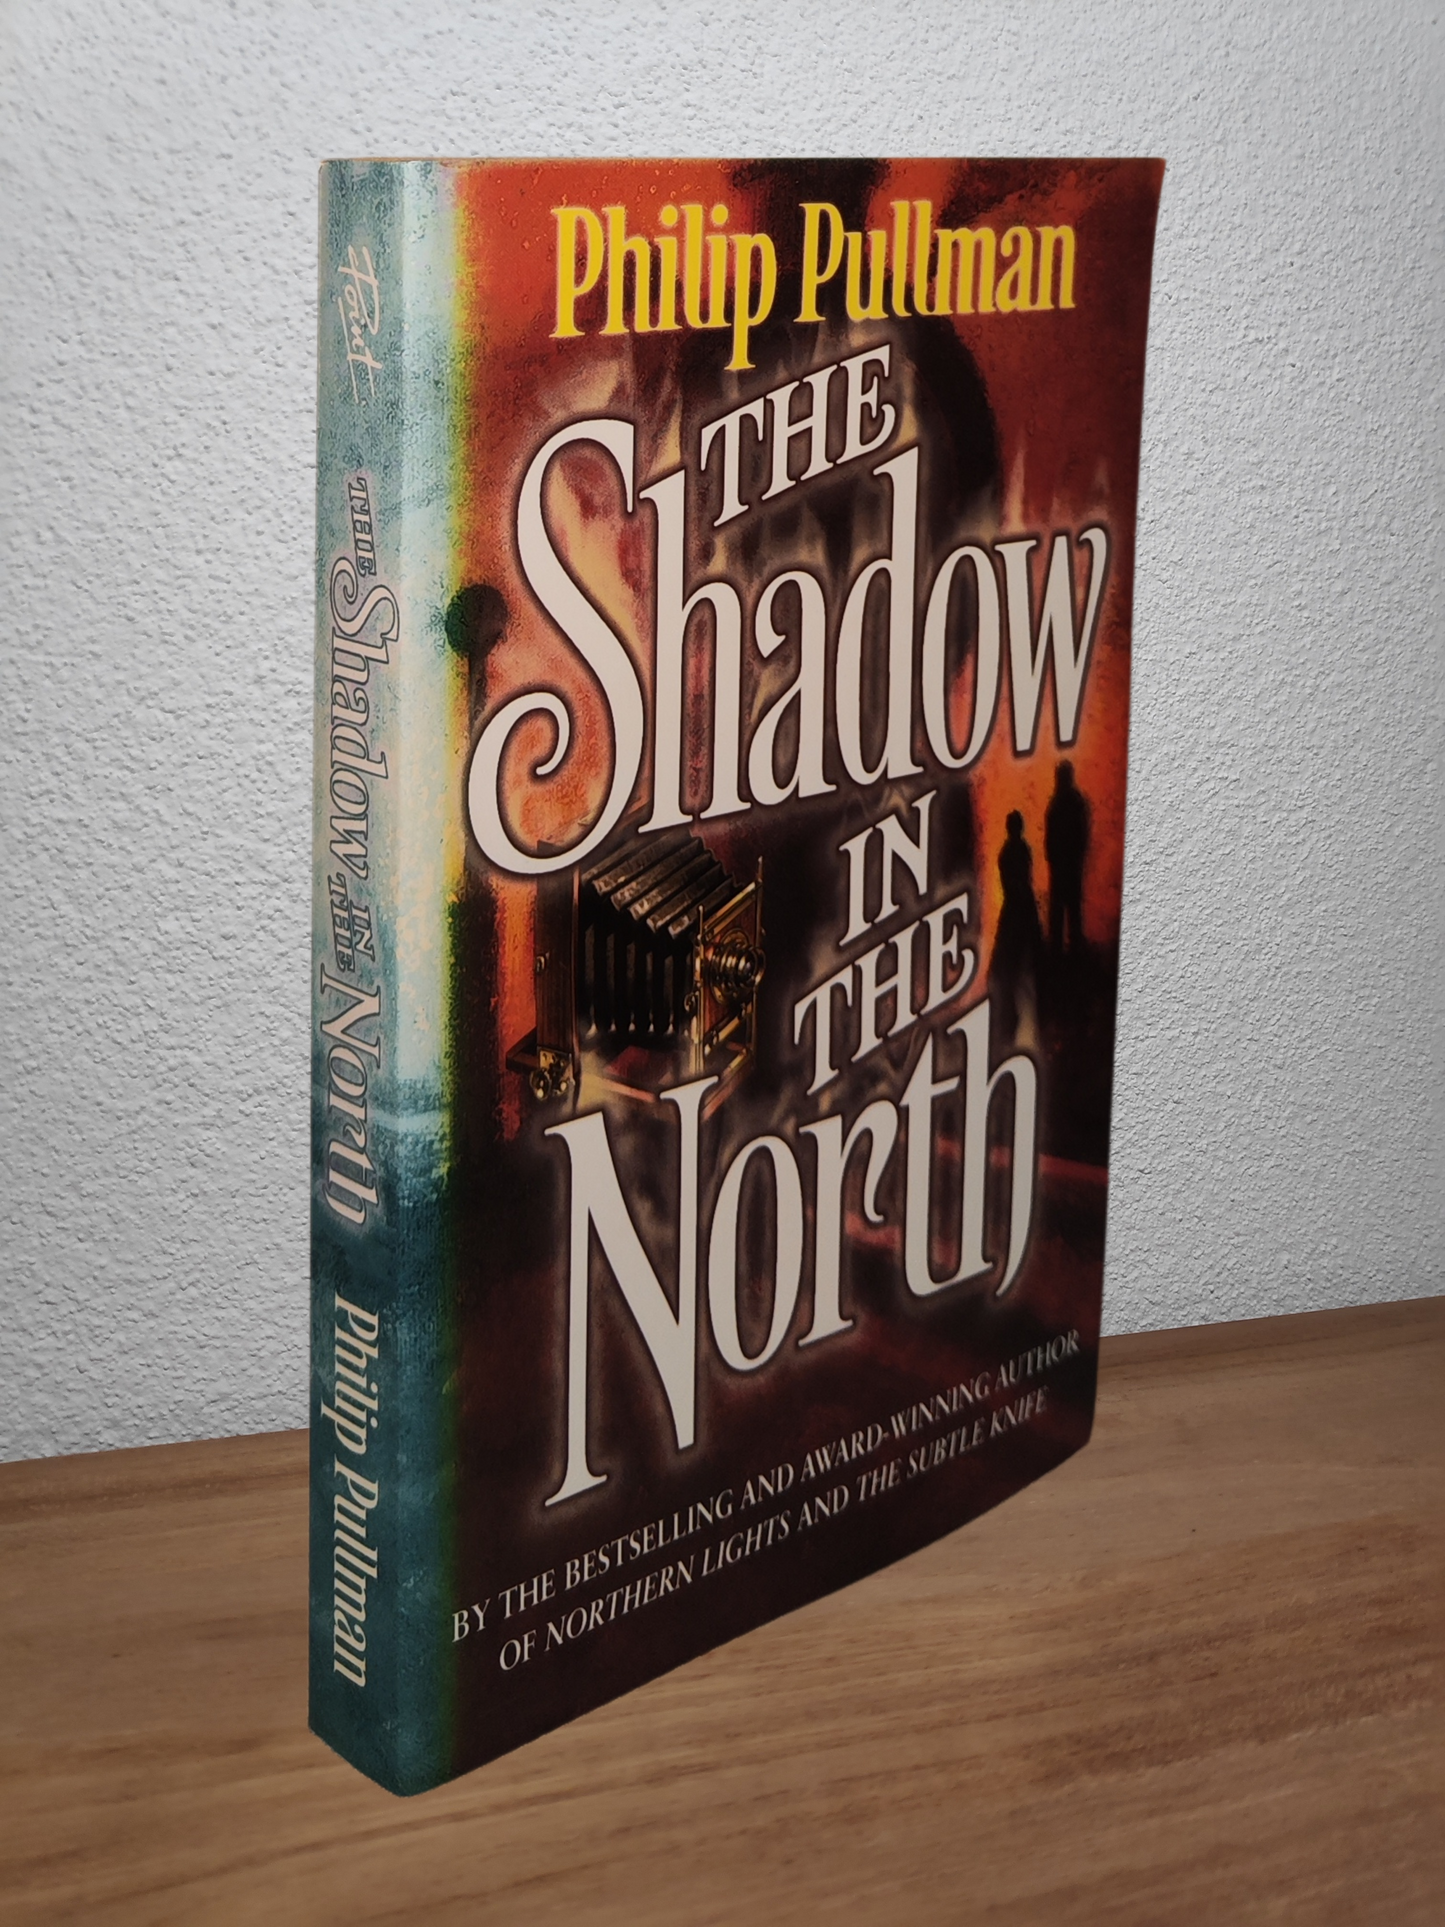 Philip Pullman - The Shadow in the North (Sally Lockhart #2) - Second-hand english book to deliver in Zurich & Switzerland